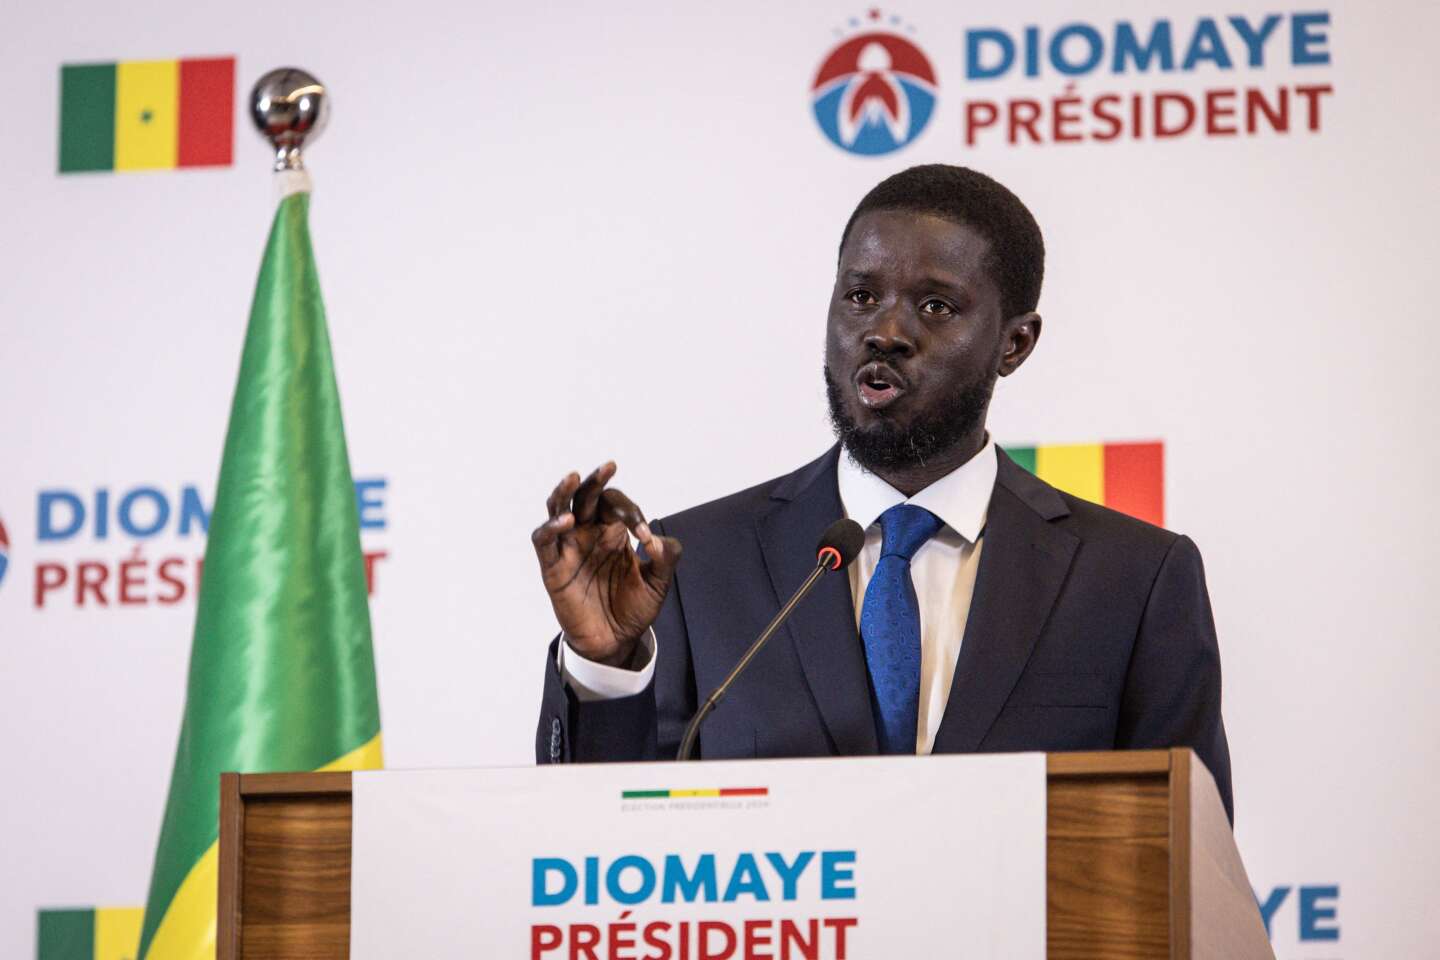 Bassirou Diomaye Faye: From Tax Collector to President-Elect in Senegal’s Stunning Political Upset thumbnail